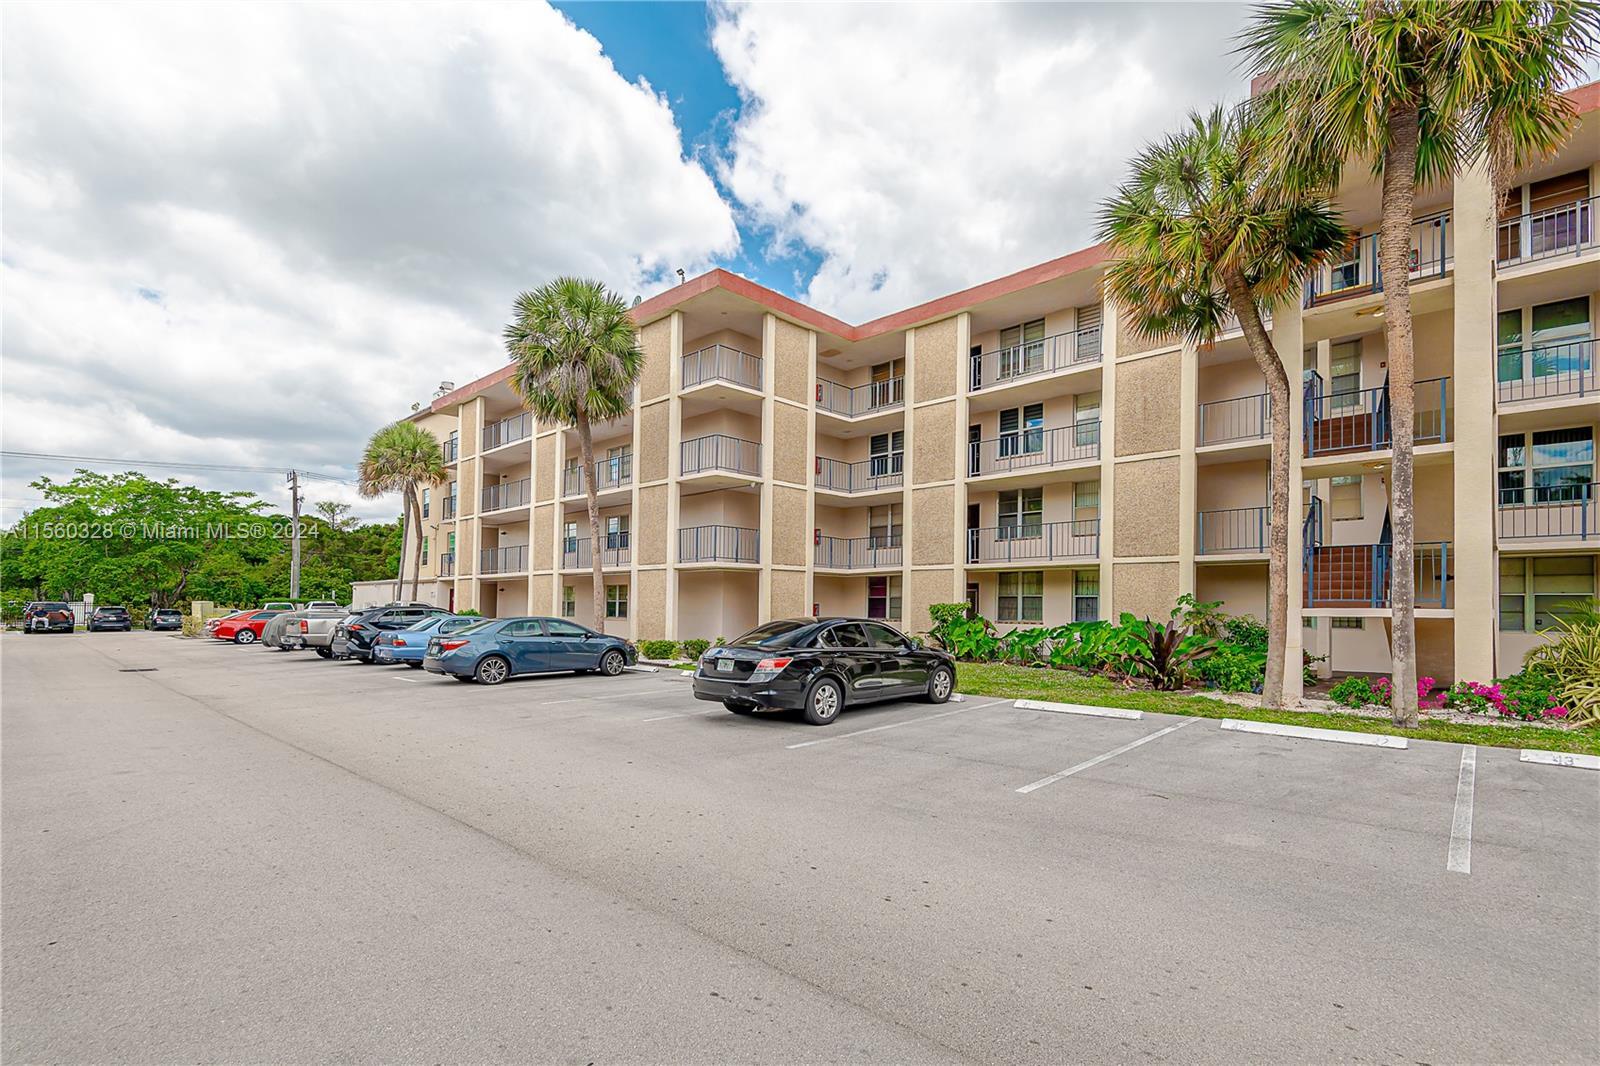 Photo of 2600 NW 49th Ave #207 in Lauderdale Lakes, FL